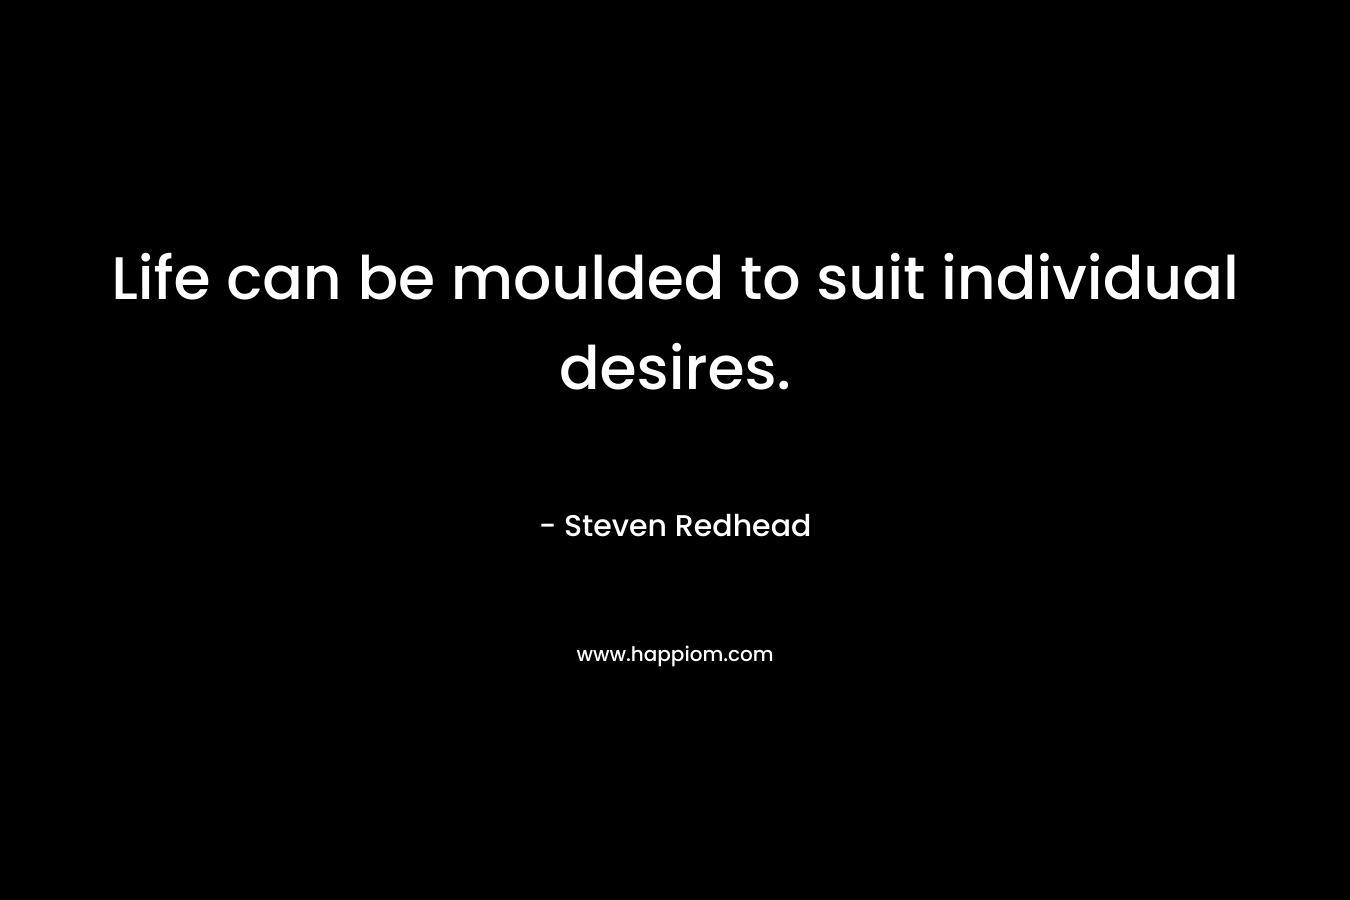 Life can be moulded to suit individual desires.